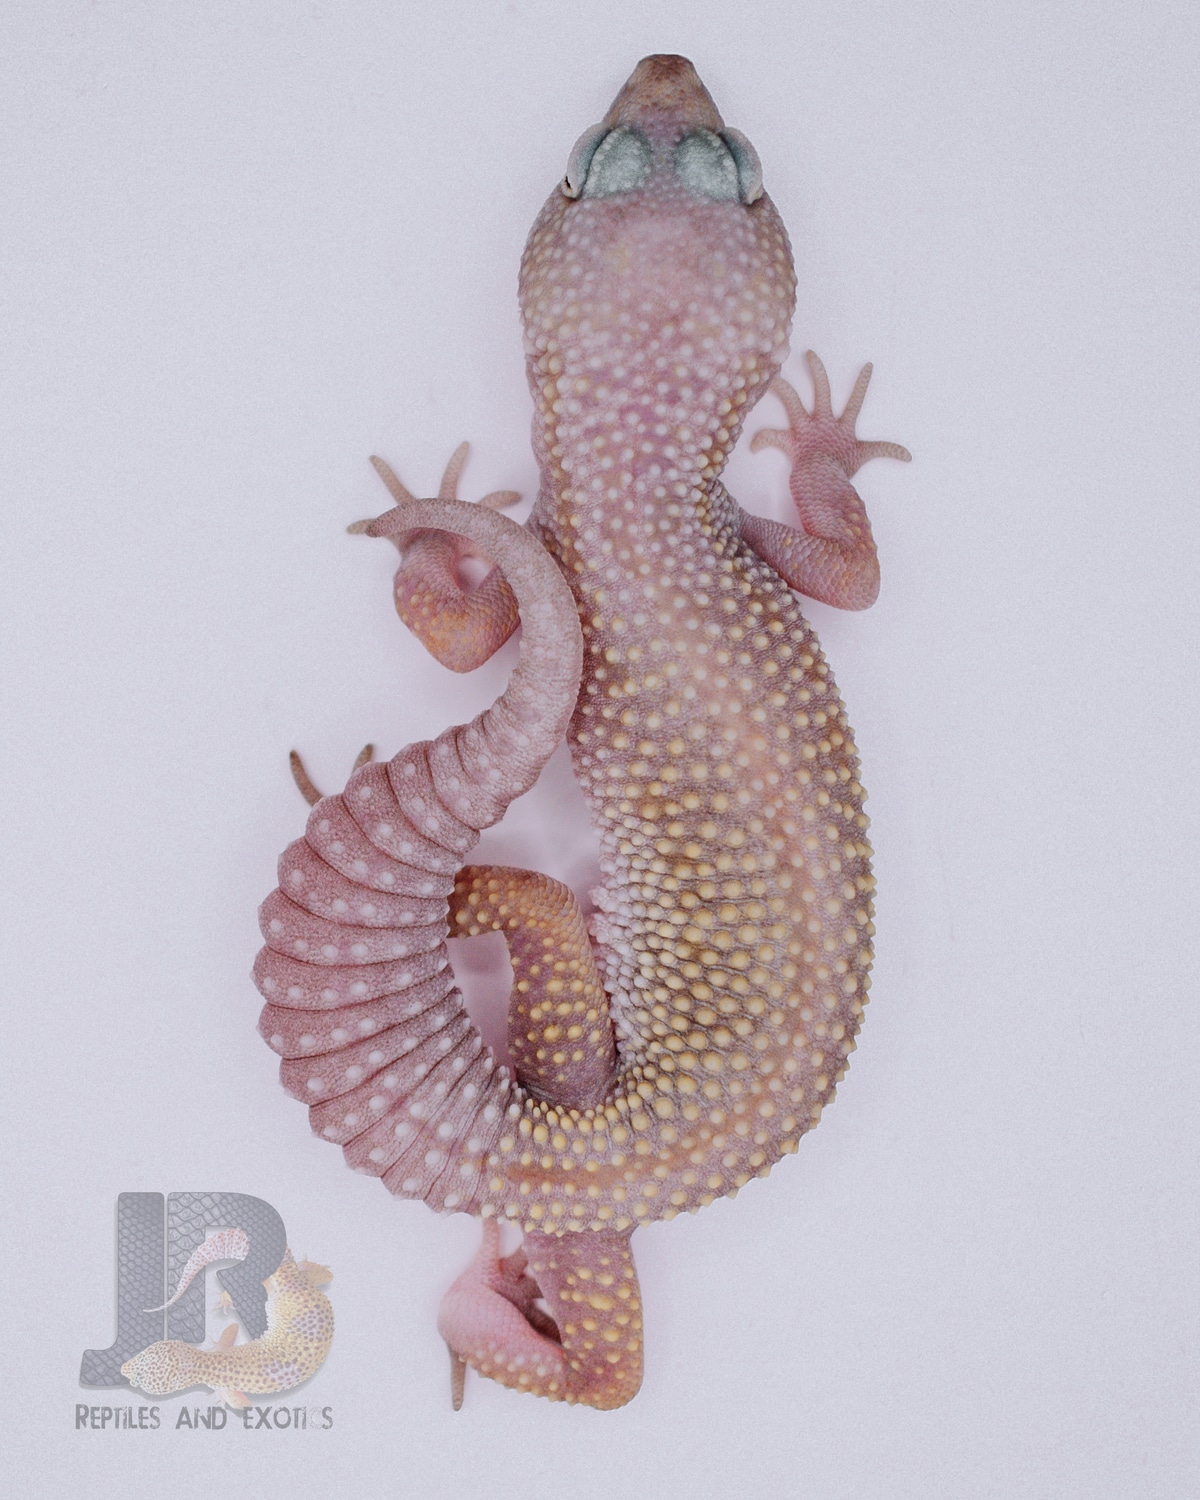 Snow Murphy Patternless 50% Het Blizzard 66% Tremper Albino Leopard Gecko by Jr Reptiles And Exotics